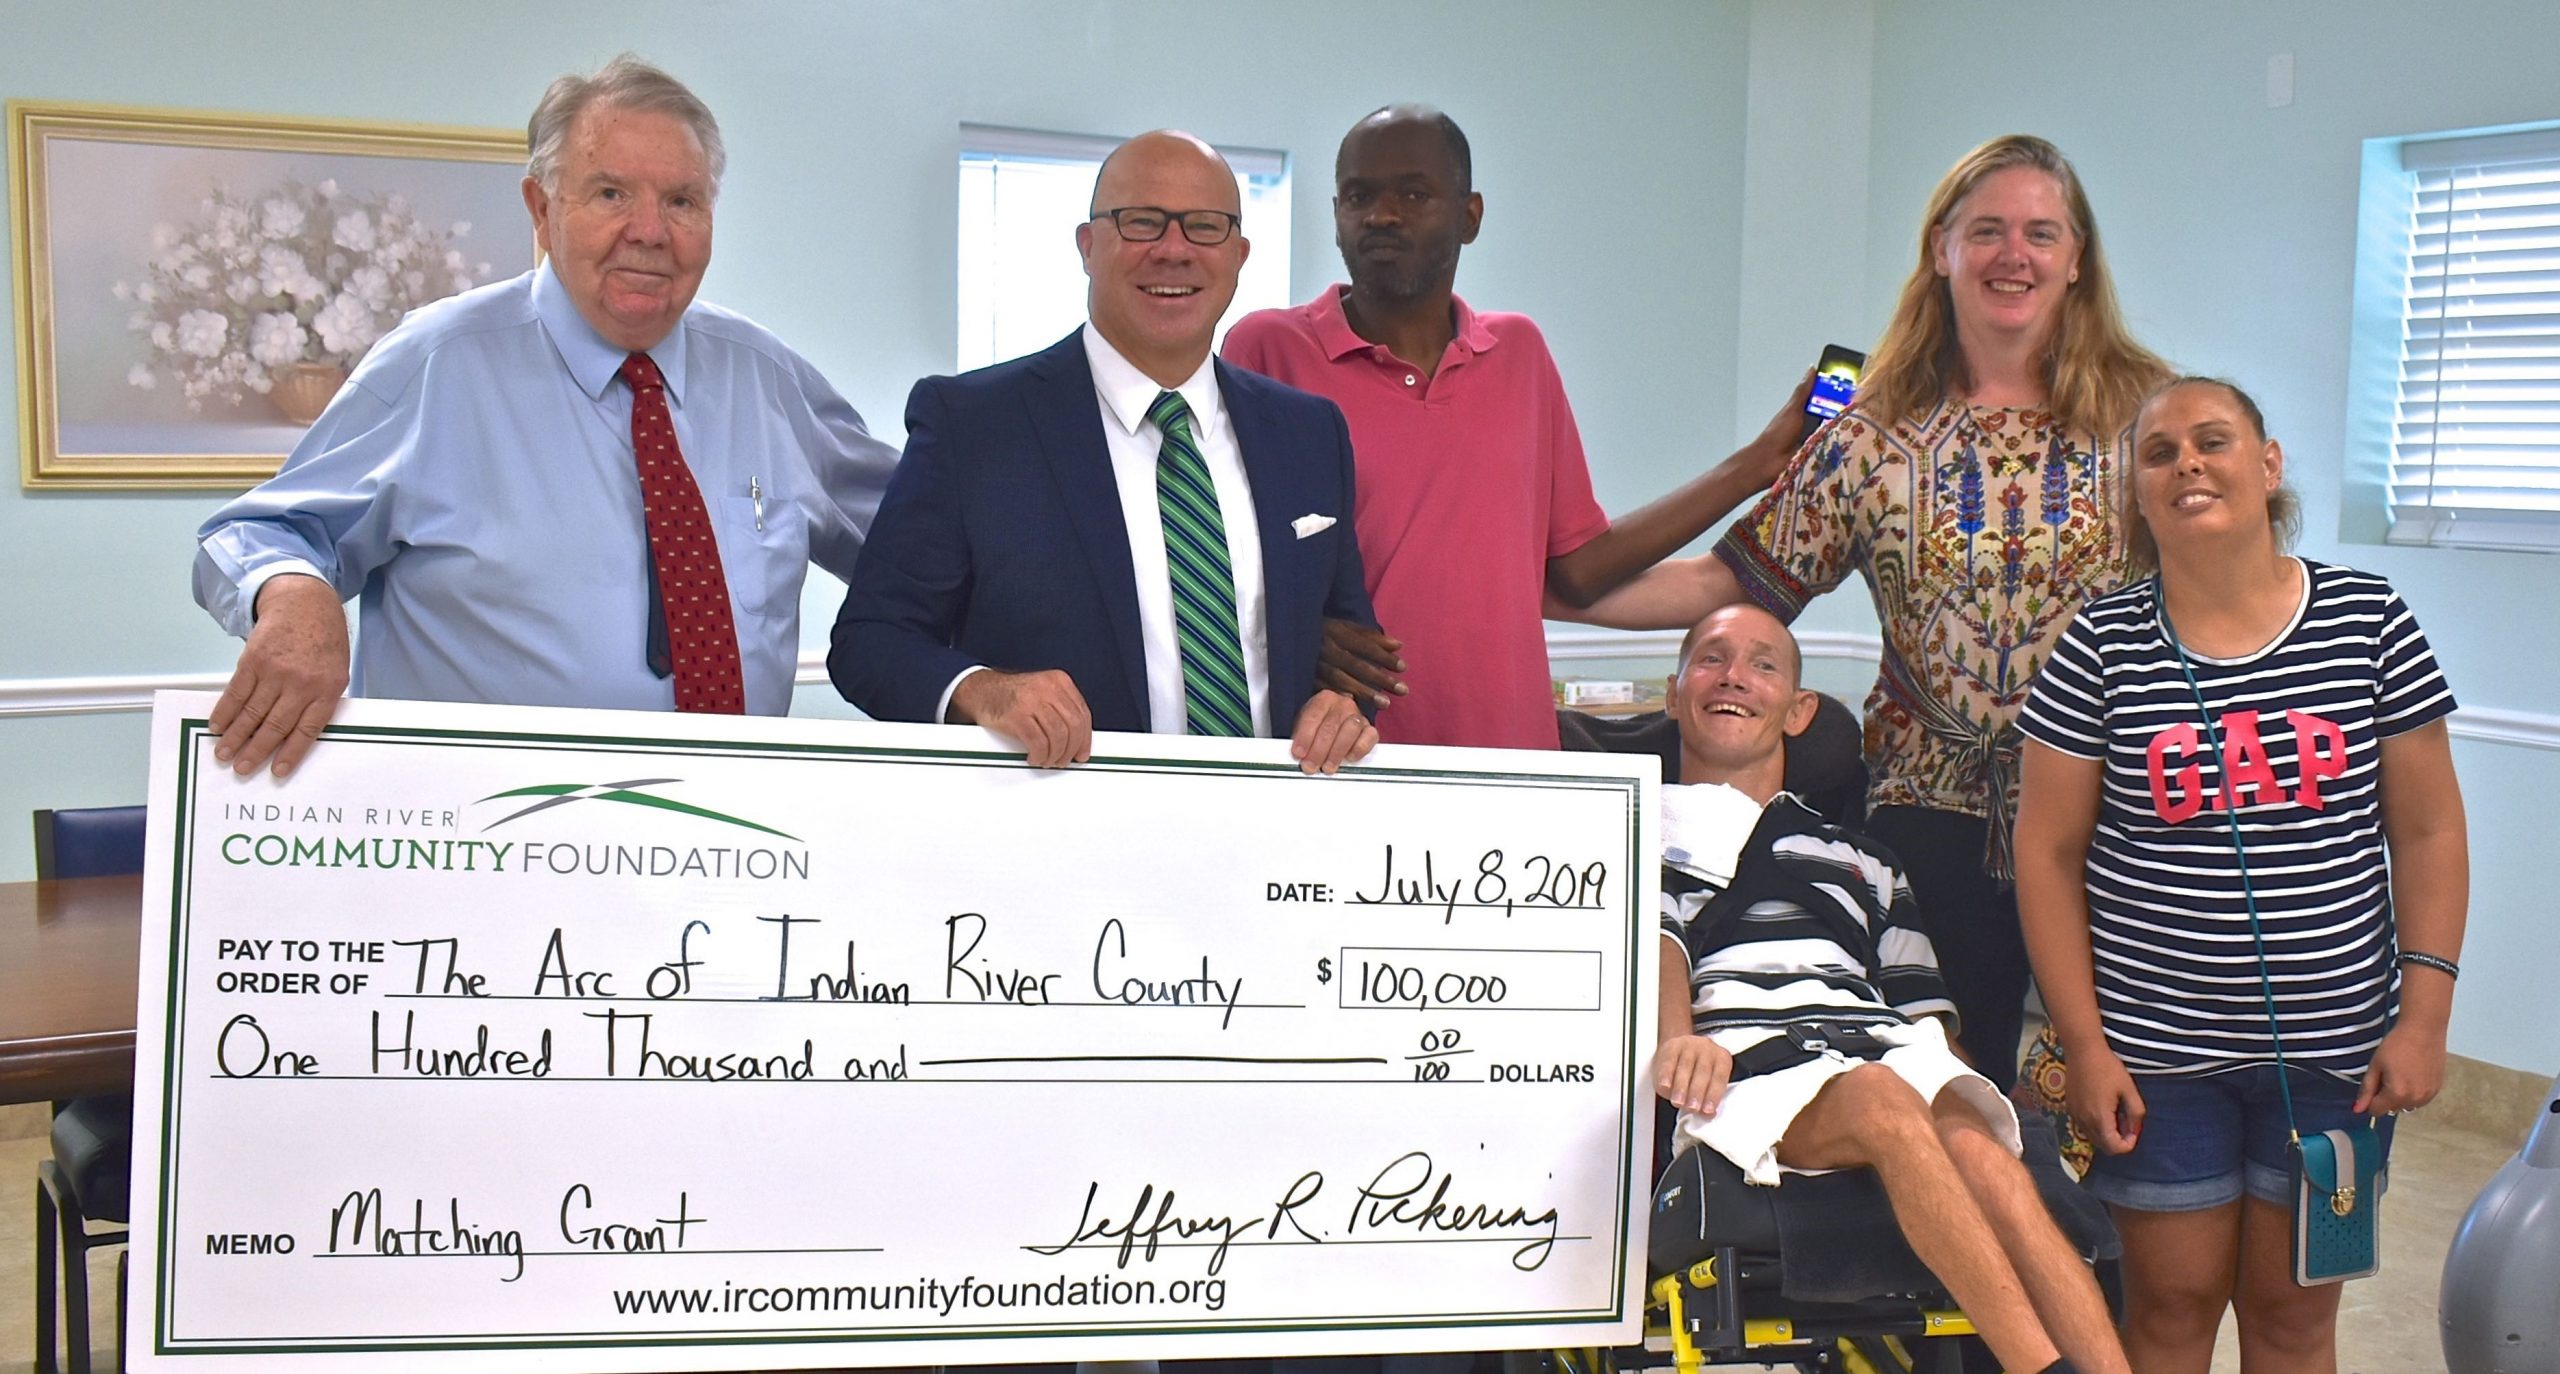 IRCF Presents The ARC of IRC with Grant Matching Check